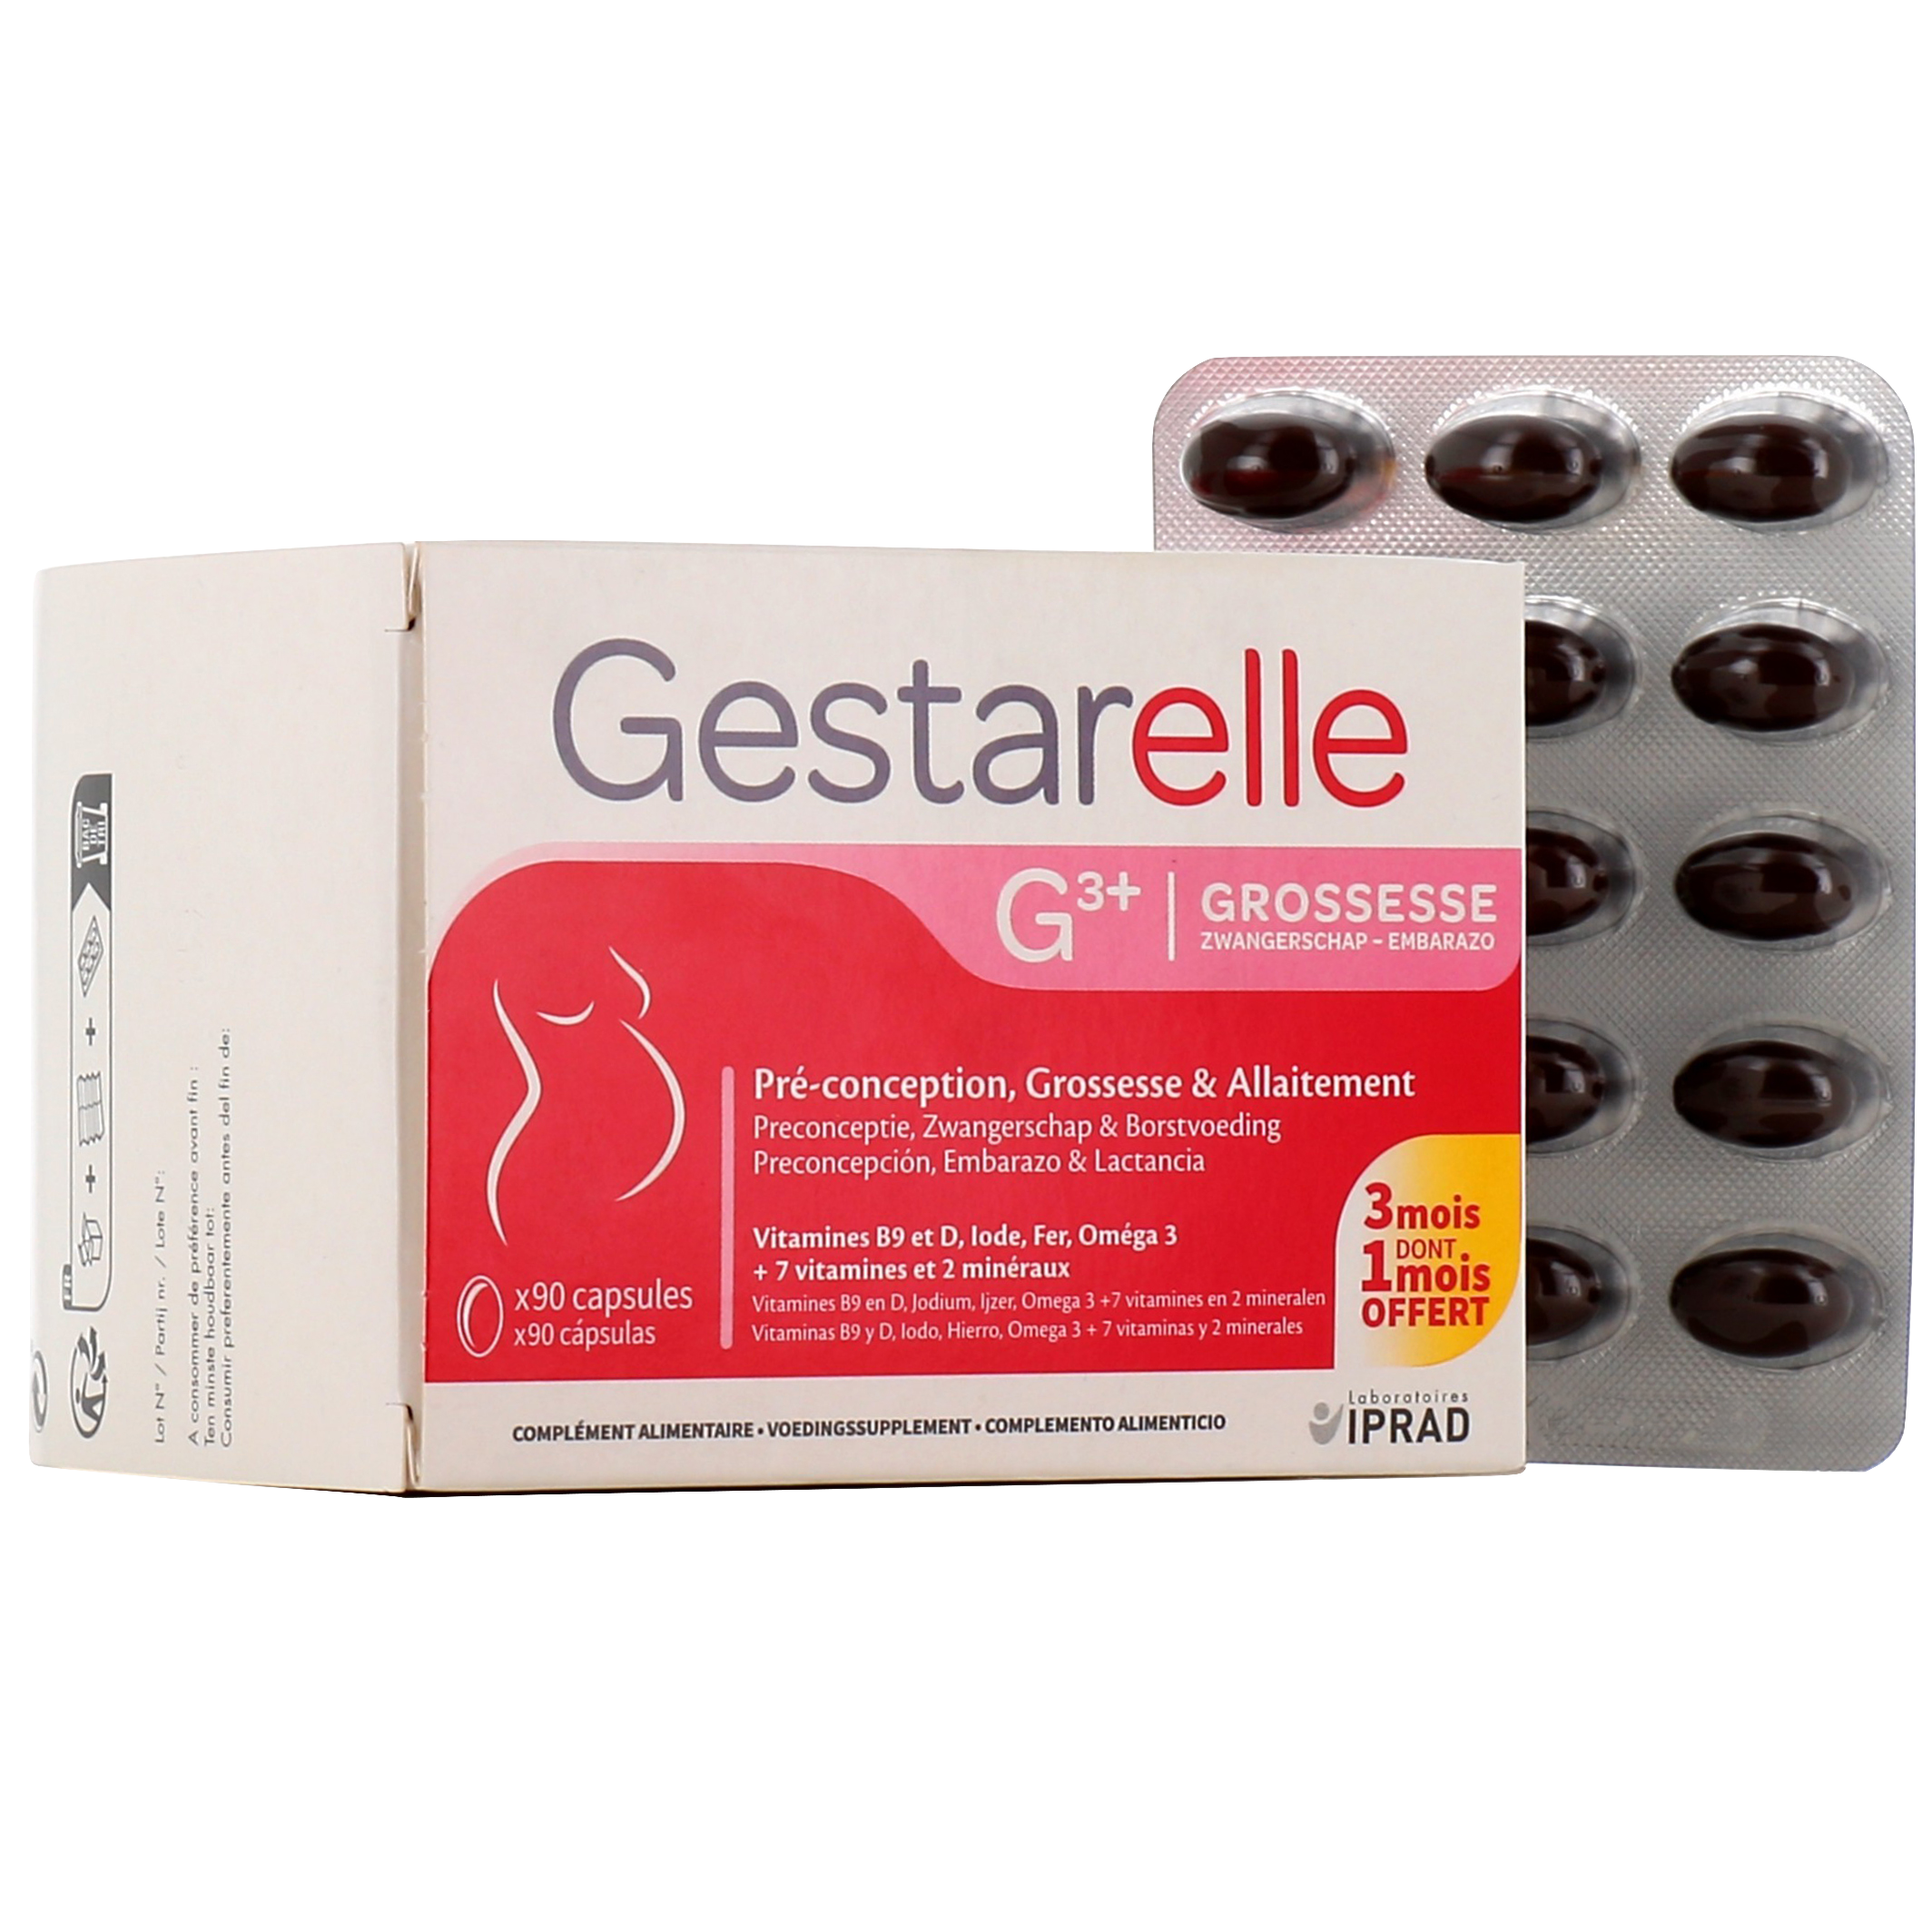 Medica RCP, Gestarelle G, Indications